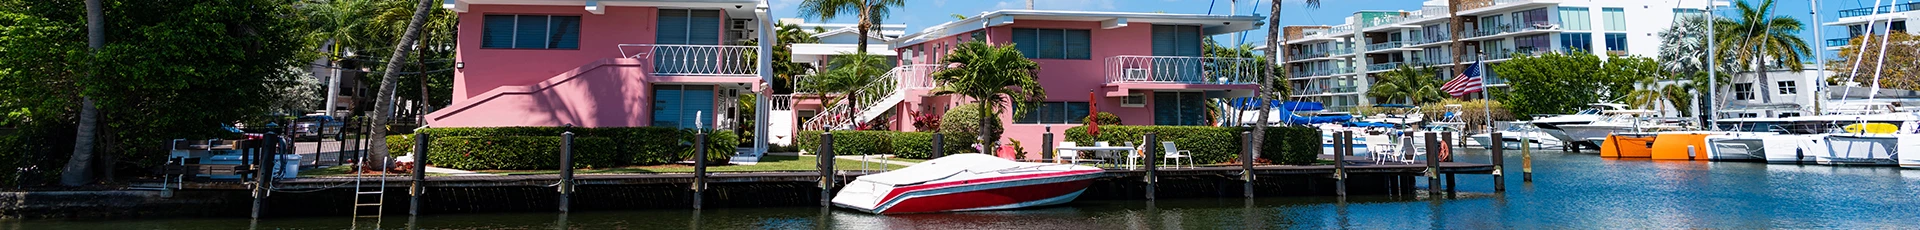 Boat Removal, Dismantle and Disposal in St Pete Beach Florida